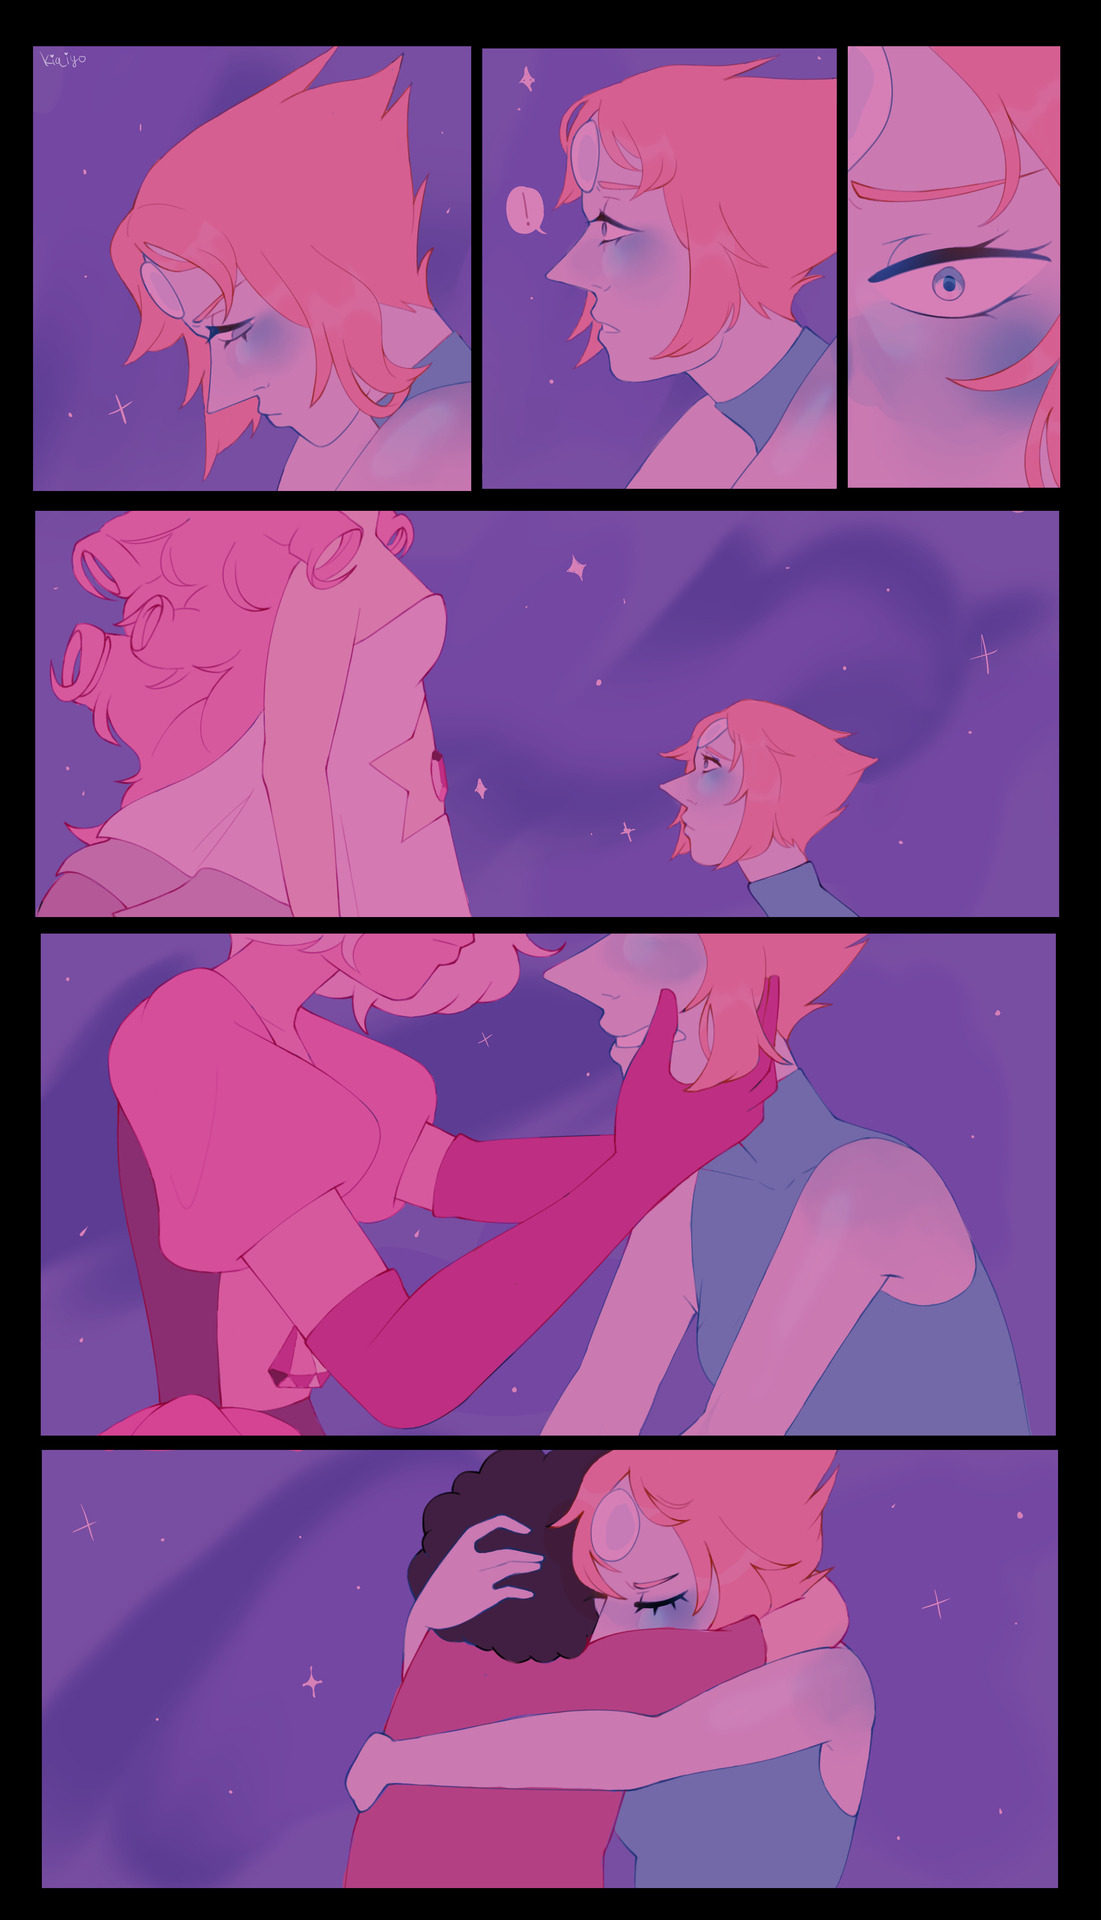 “acceptance” (ps i did a thing where when pearl gets intense emotions she becomes pearlescent)